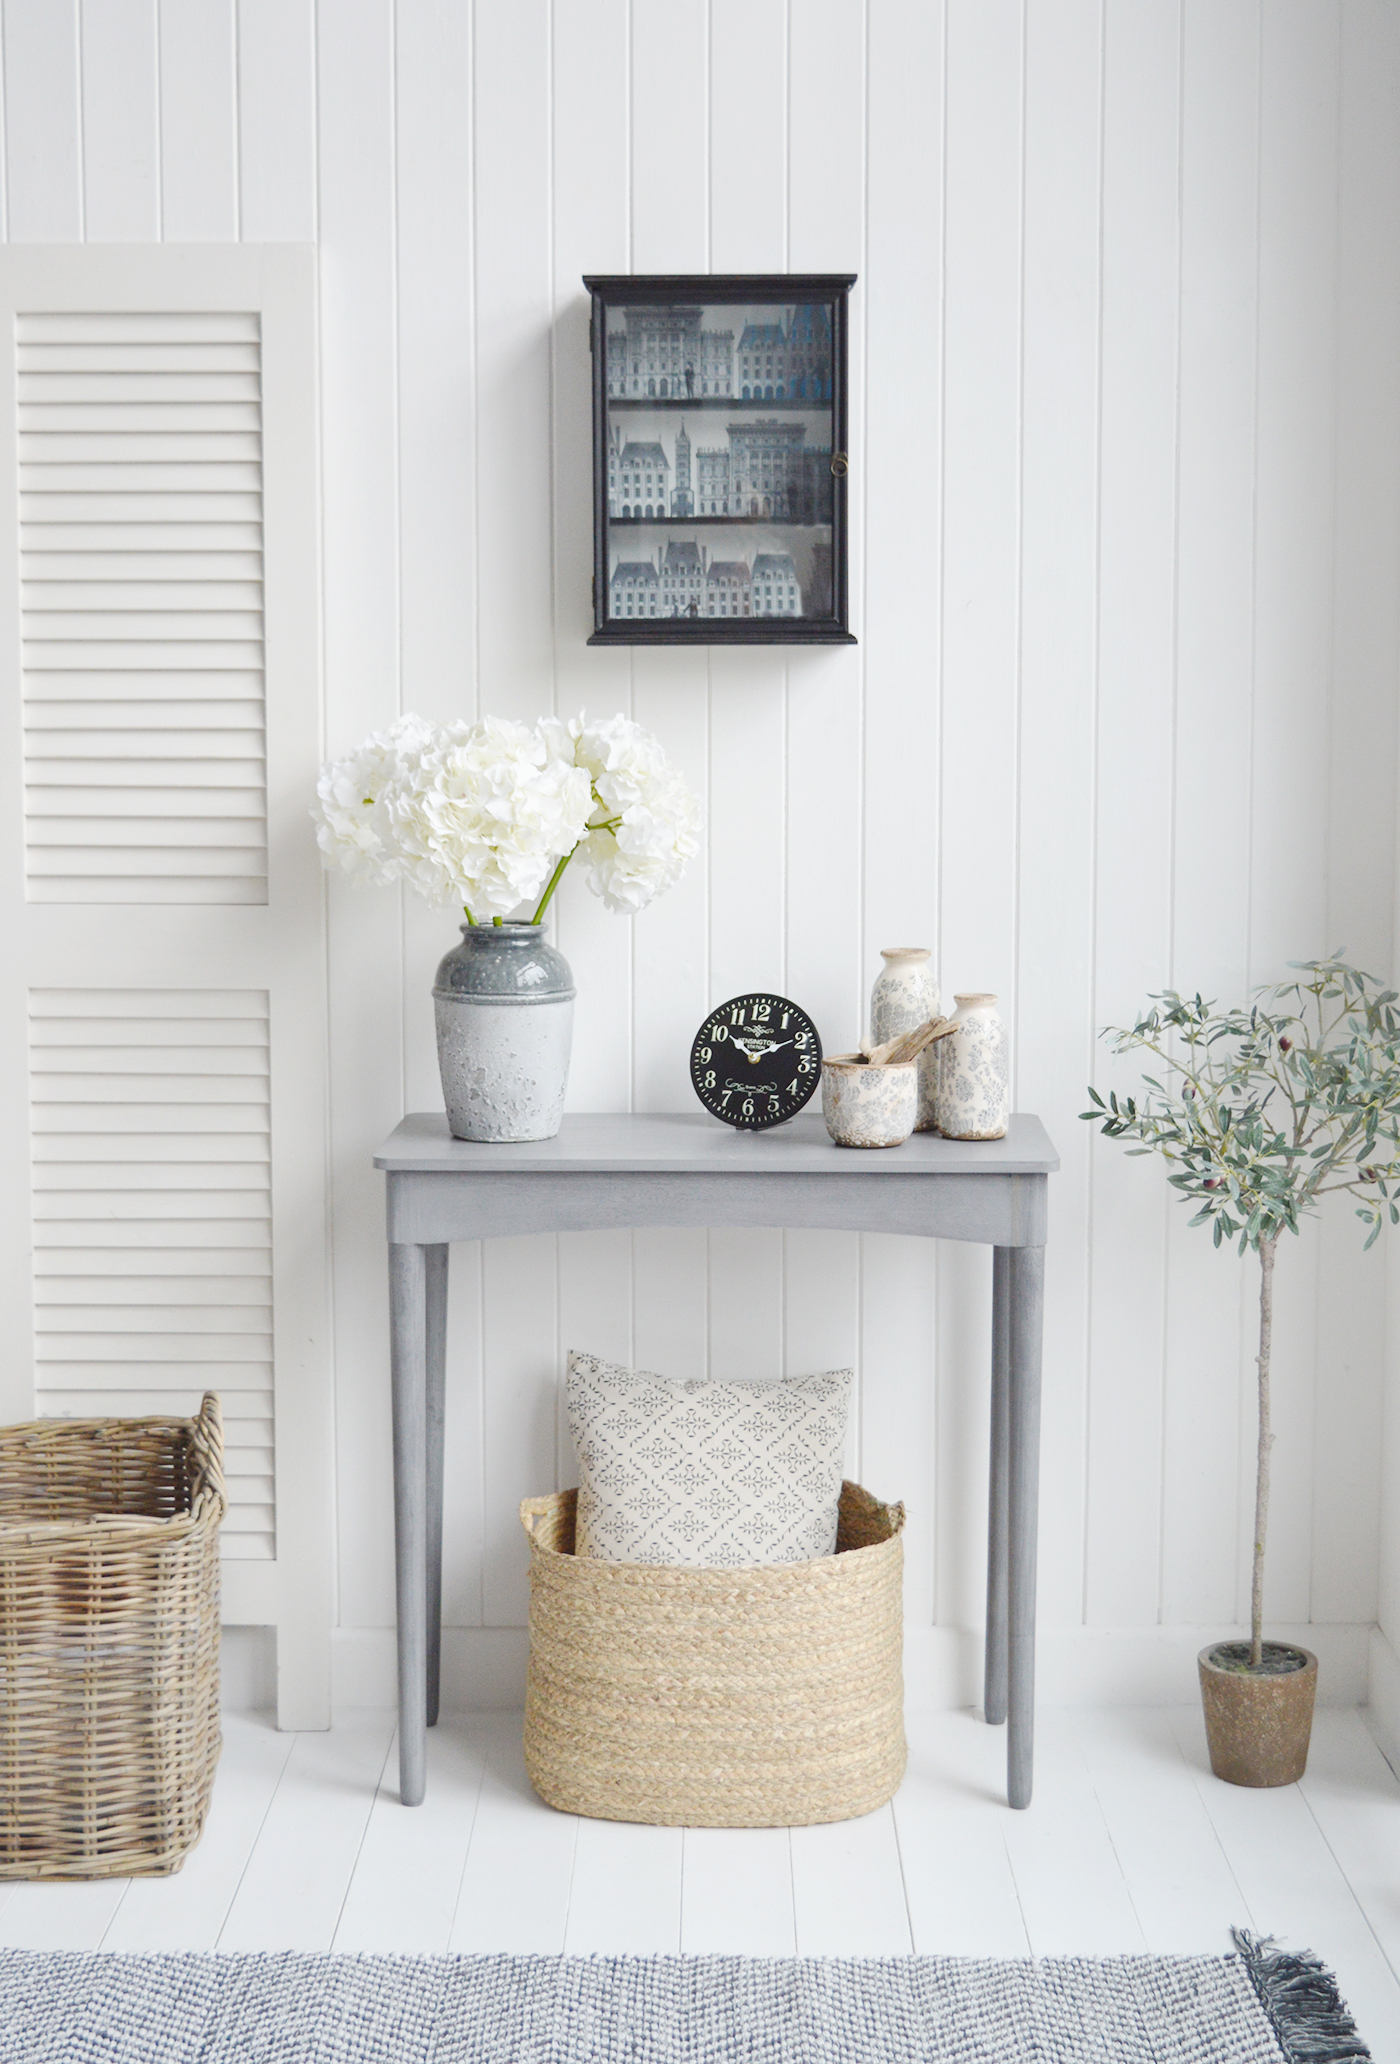 Beacon Hill Wall Cabinet - New England White Furniture for coastal, country and modern farmhouse styled homes and interiors